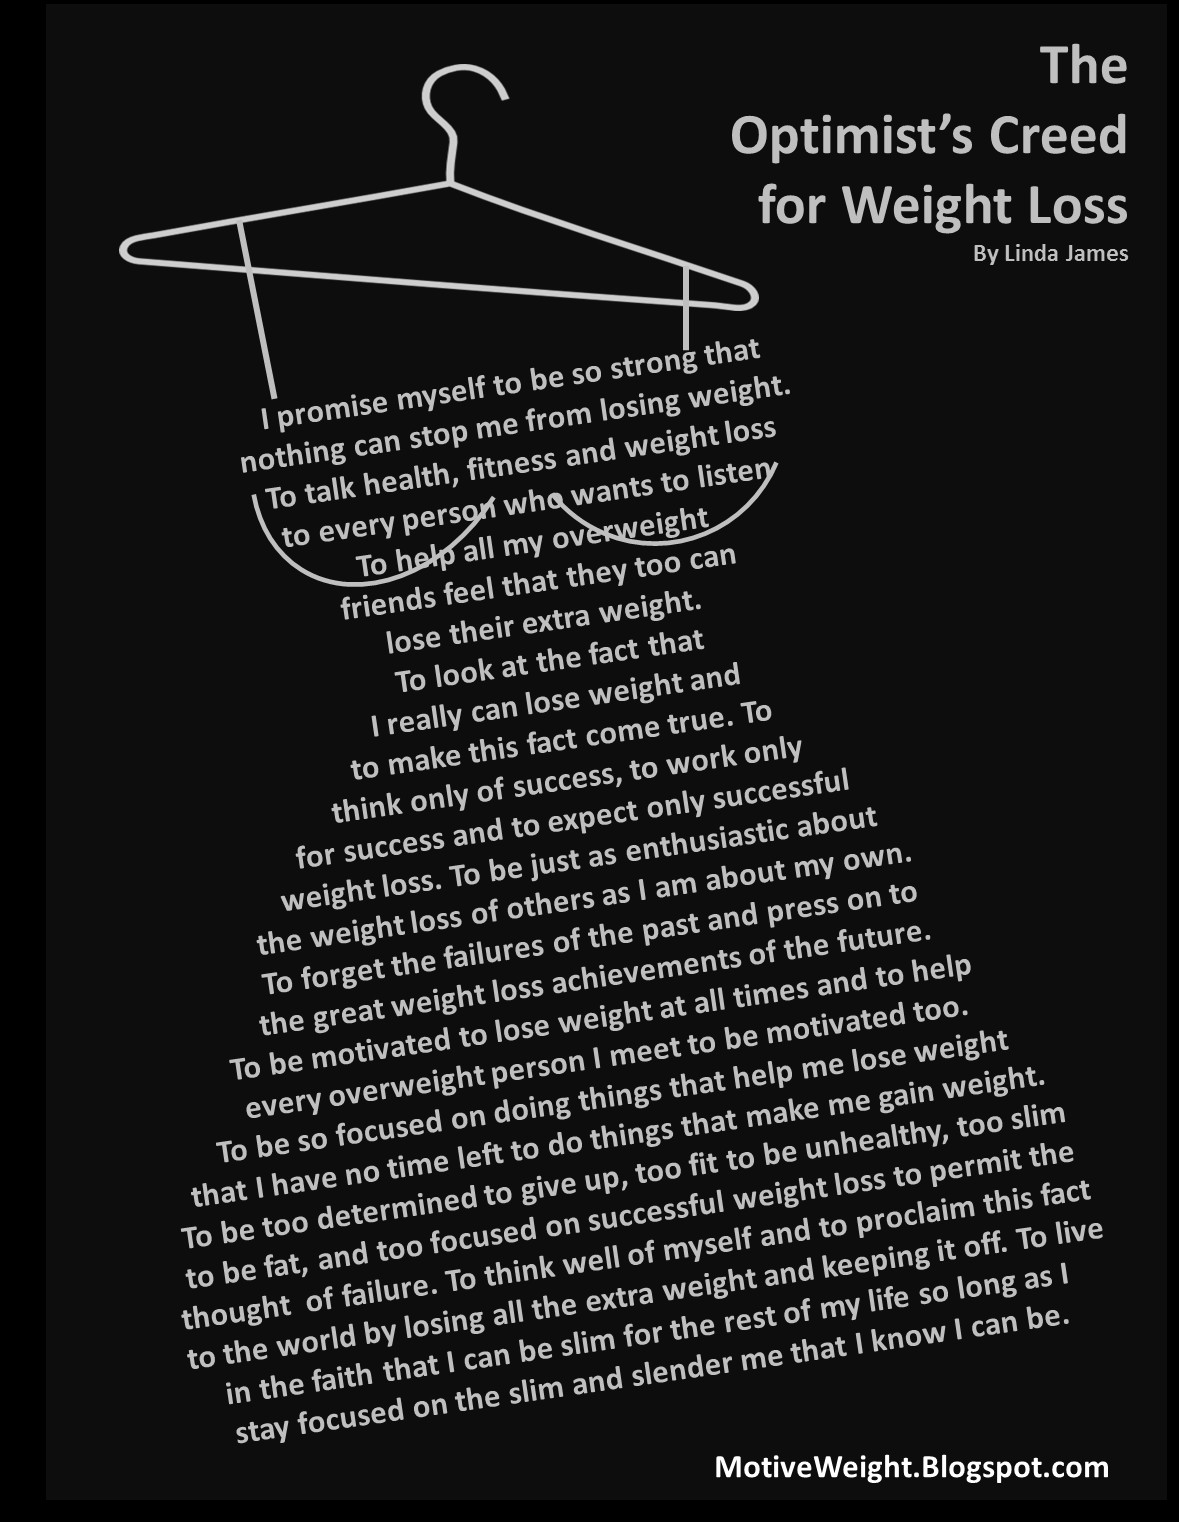 Daily Motivational Quotes For Weight Loss
 MotiveWeight The Optimist s Creed for Weight Loss